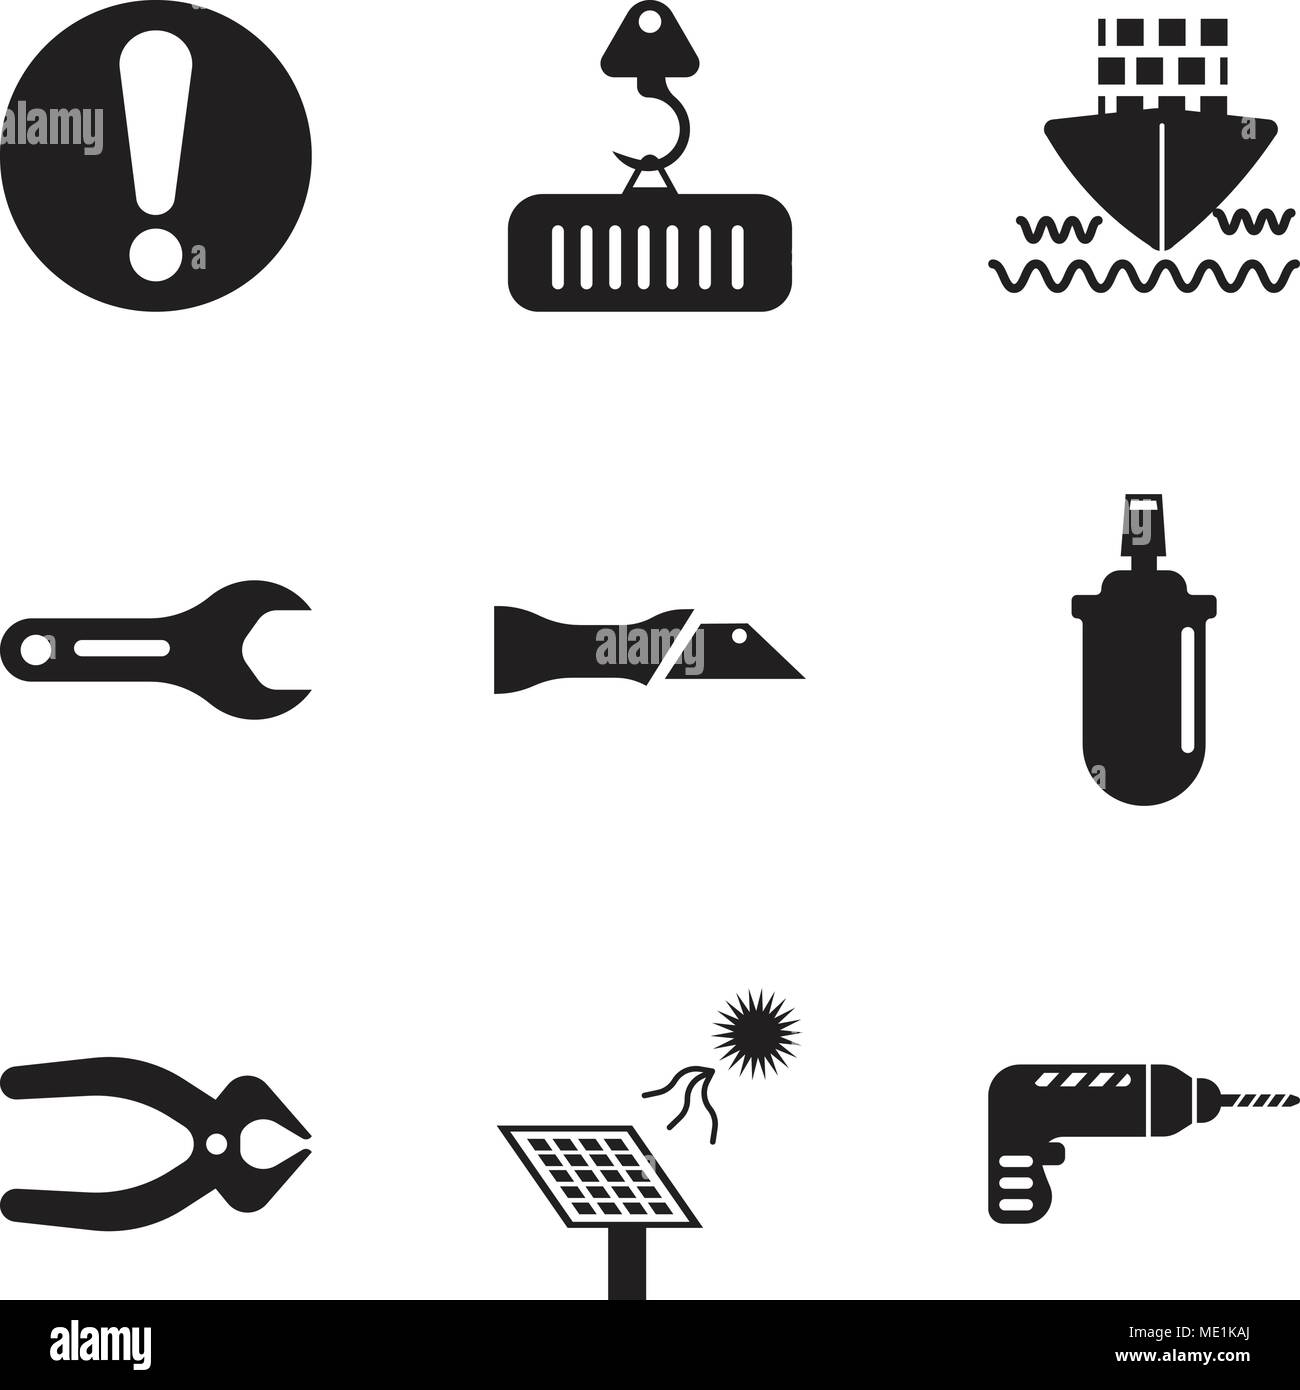 Set Of 9 simple editable icons such as drill, solar battery, nipper, gas can, knife, pipe wrench, ship, crane with load, exclamation, can be used for  Stock Vector